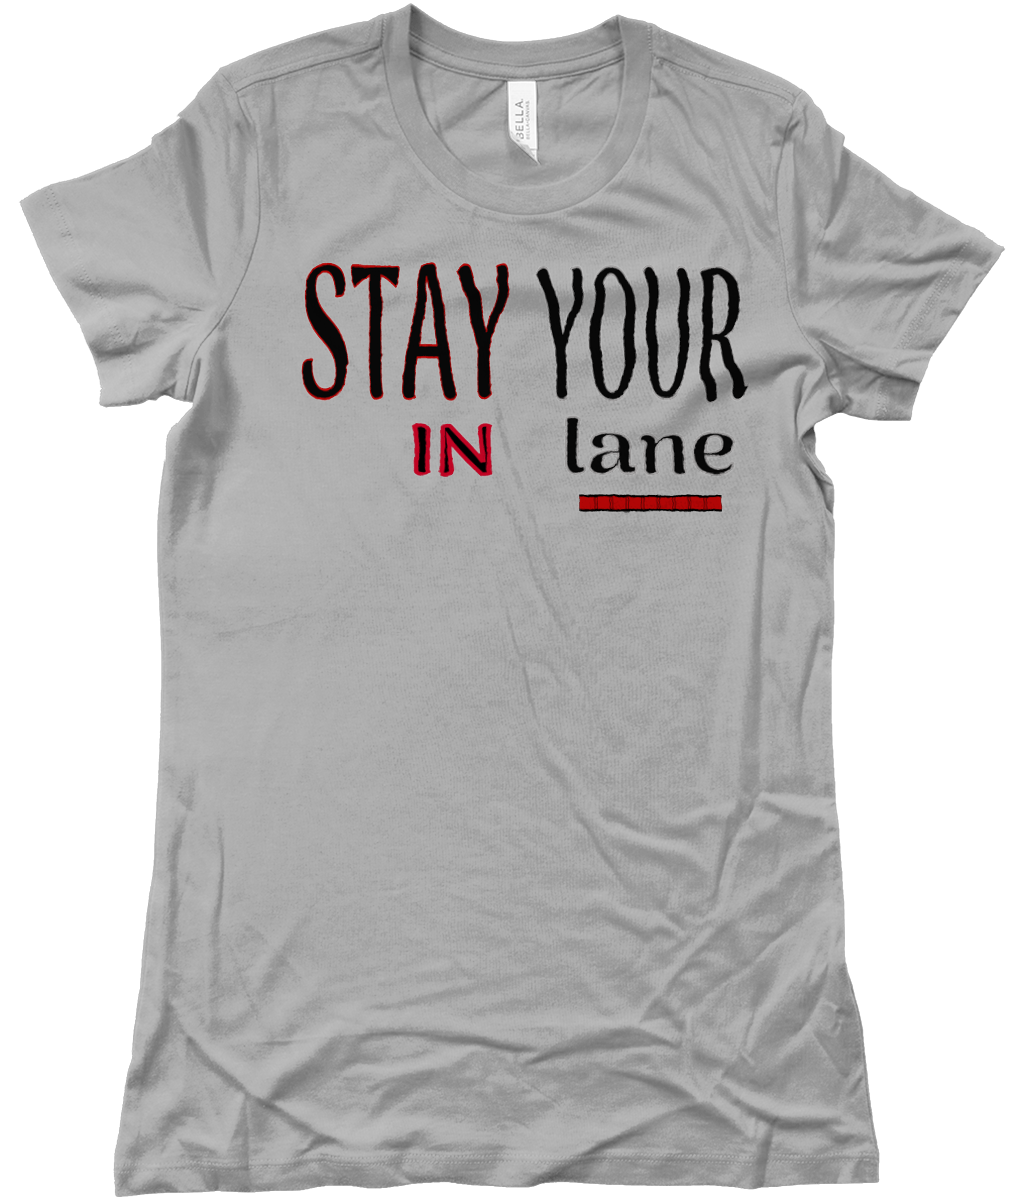 STAY IN YOUR lane 01-02 Ladies Designer Bella + Canvas The Favourite Cotton Long T-shirt (10 colors)